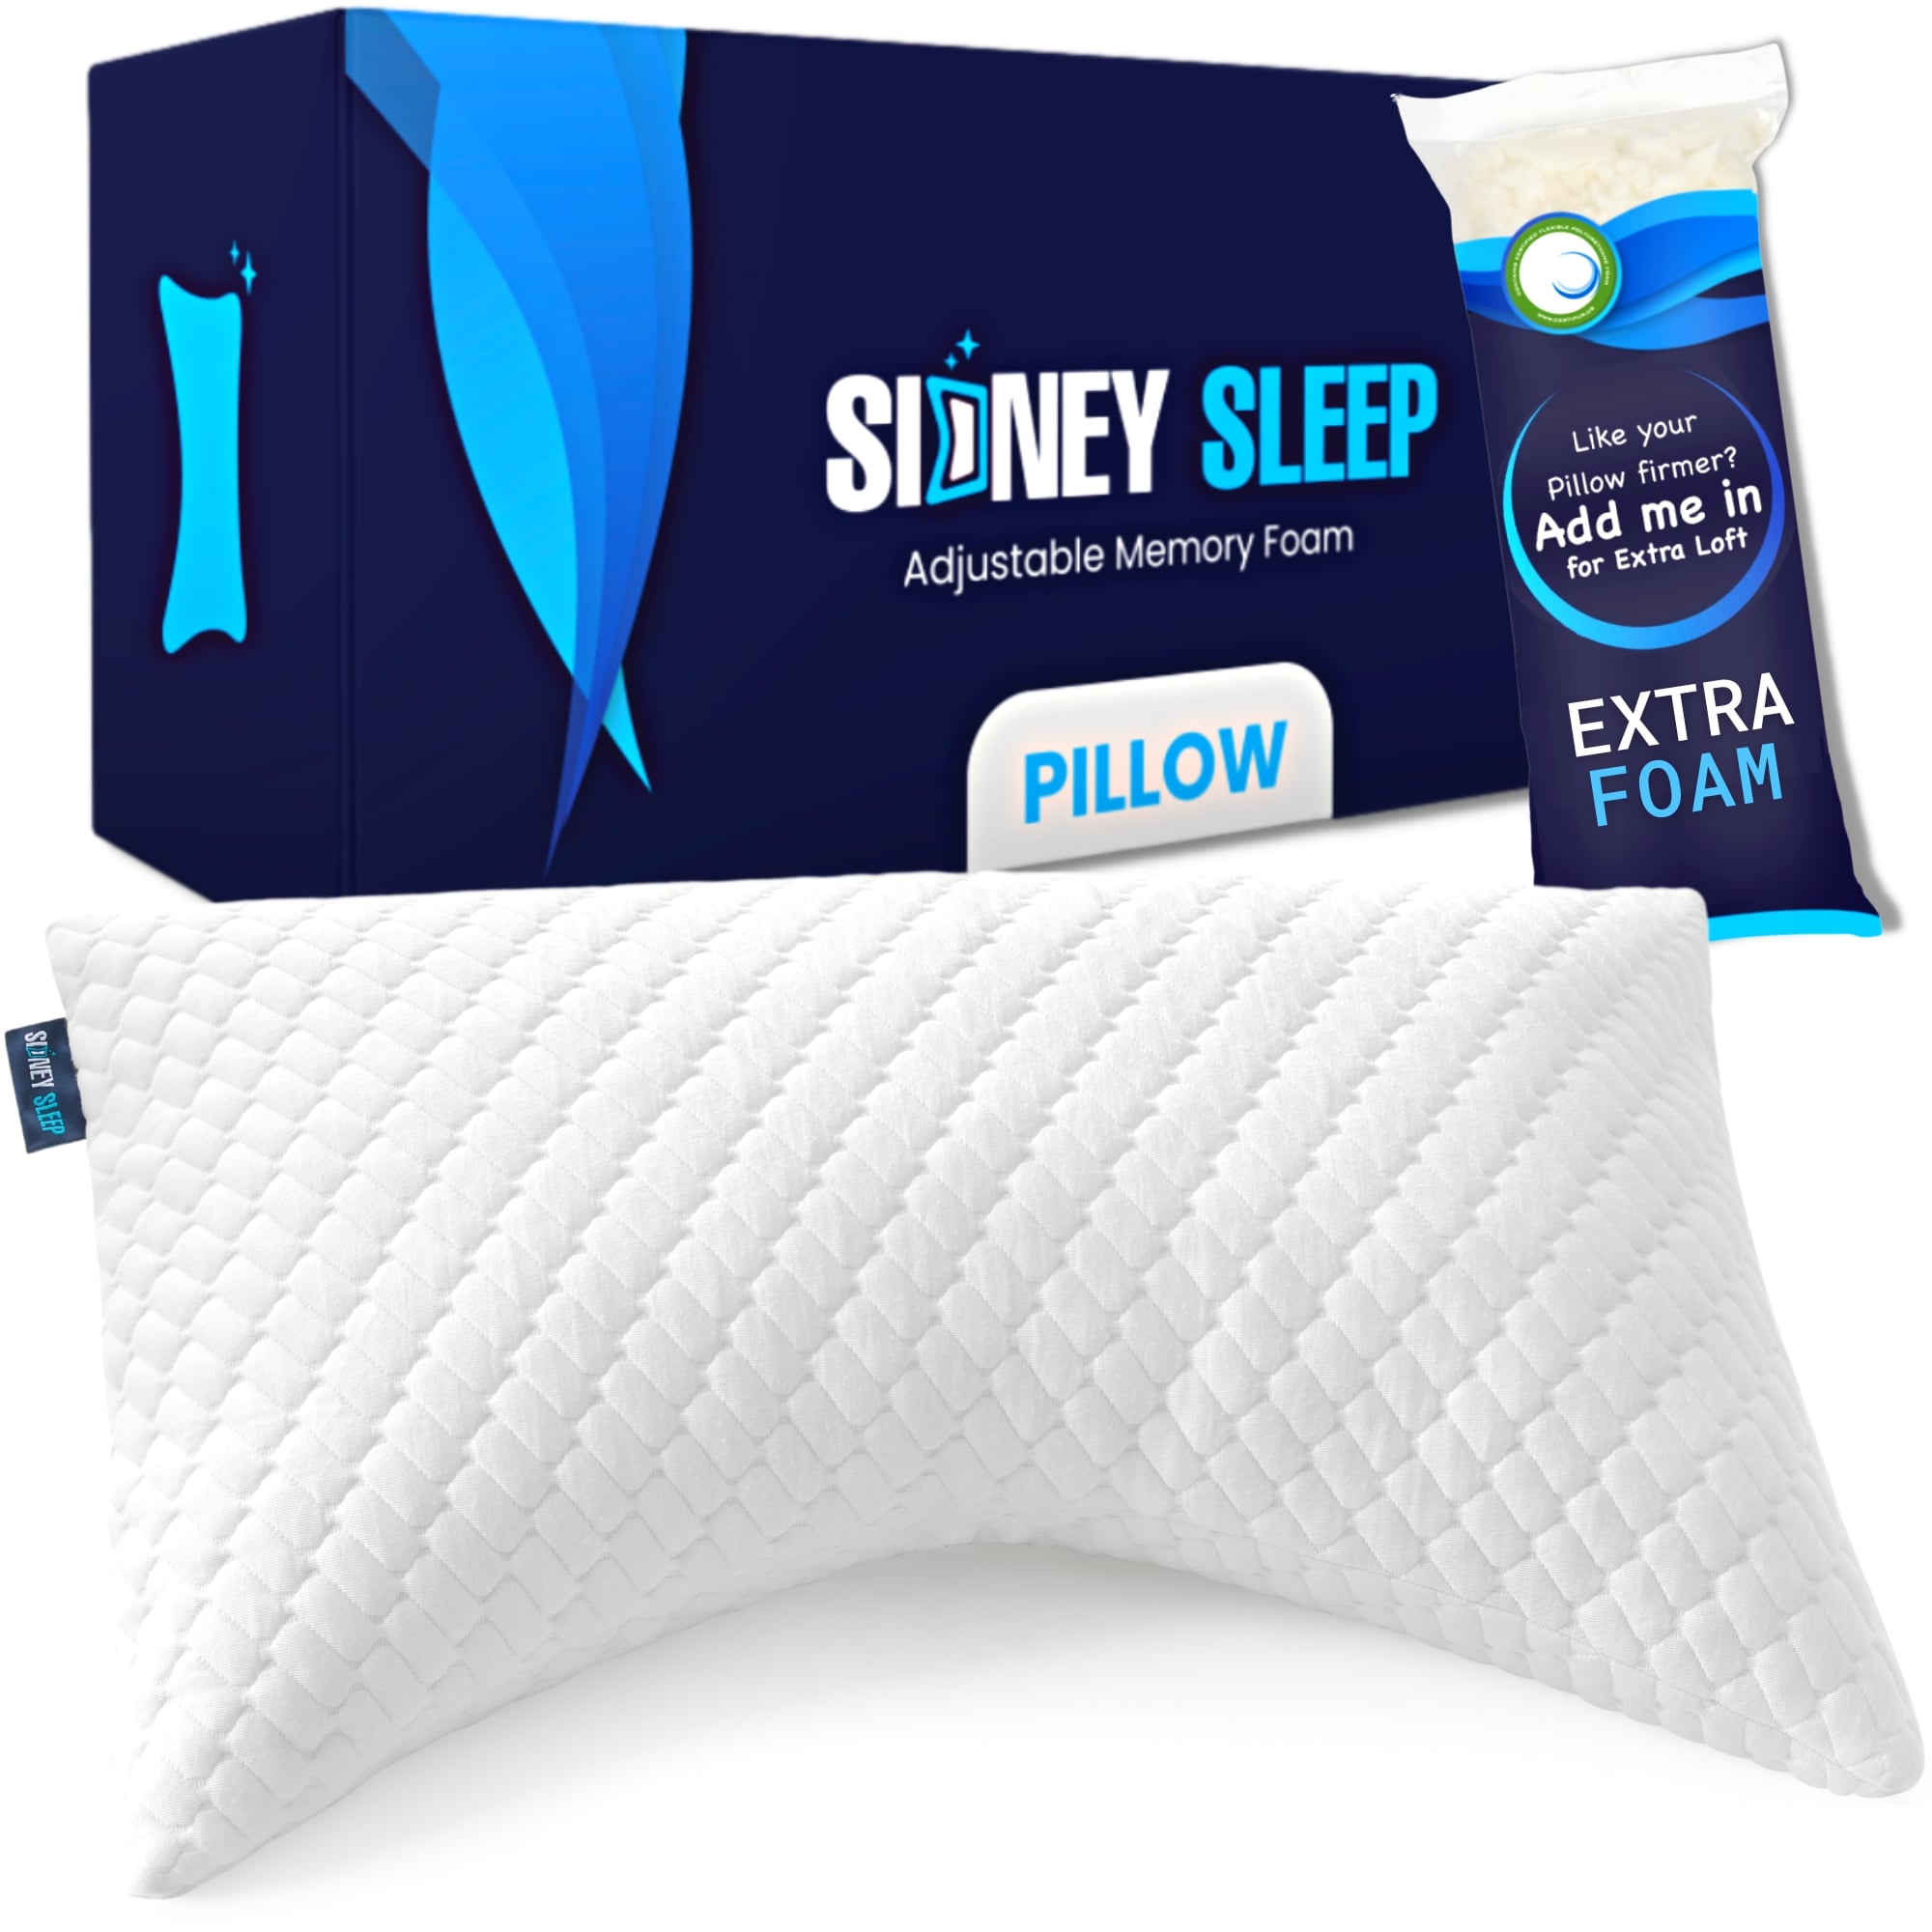 Memory Foam Pillows Queen Size Set of 4 - Bamboo Cooling Bed Pillows for Sleeping for Stomach, Back and Side Sleeper - Firm Cool Shredded Memory Foam